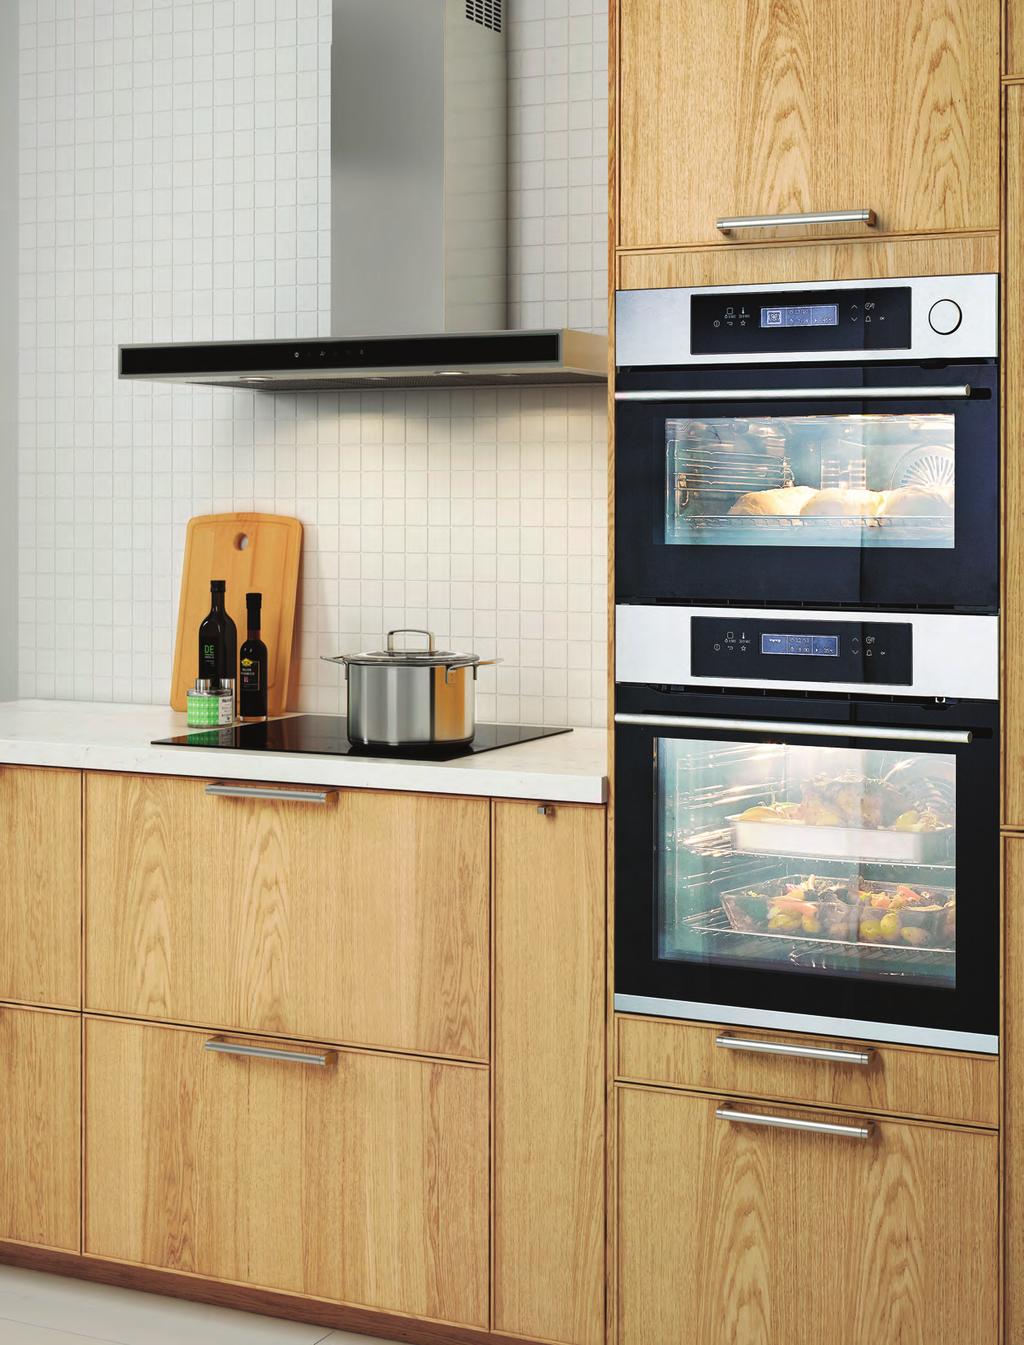 Buy these appliances together and save Set price $ 799 Total saving $98 * Inter IKEA Systems B.V.